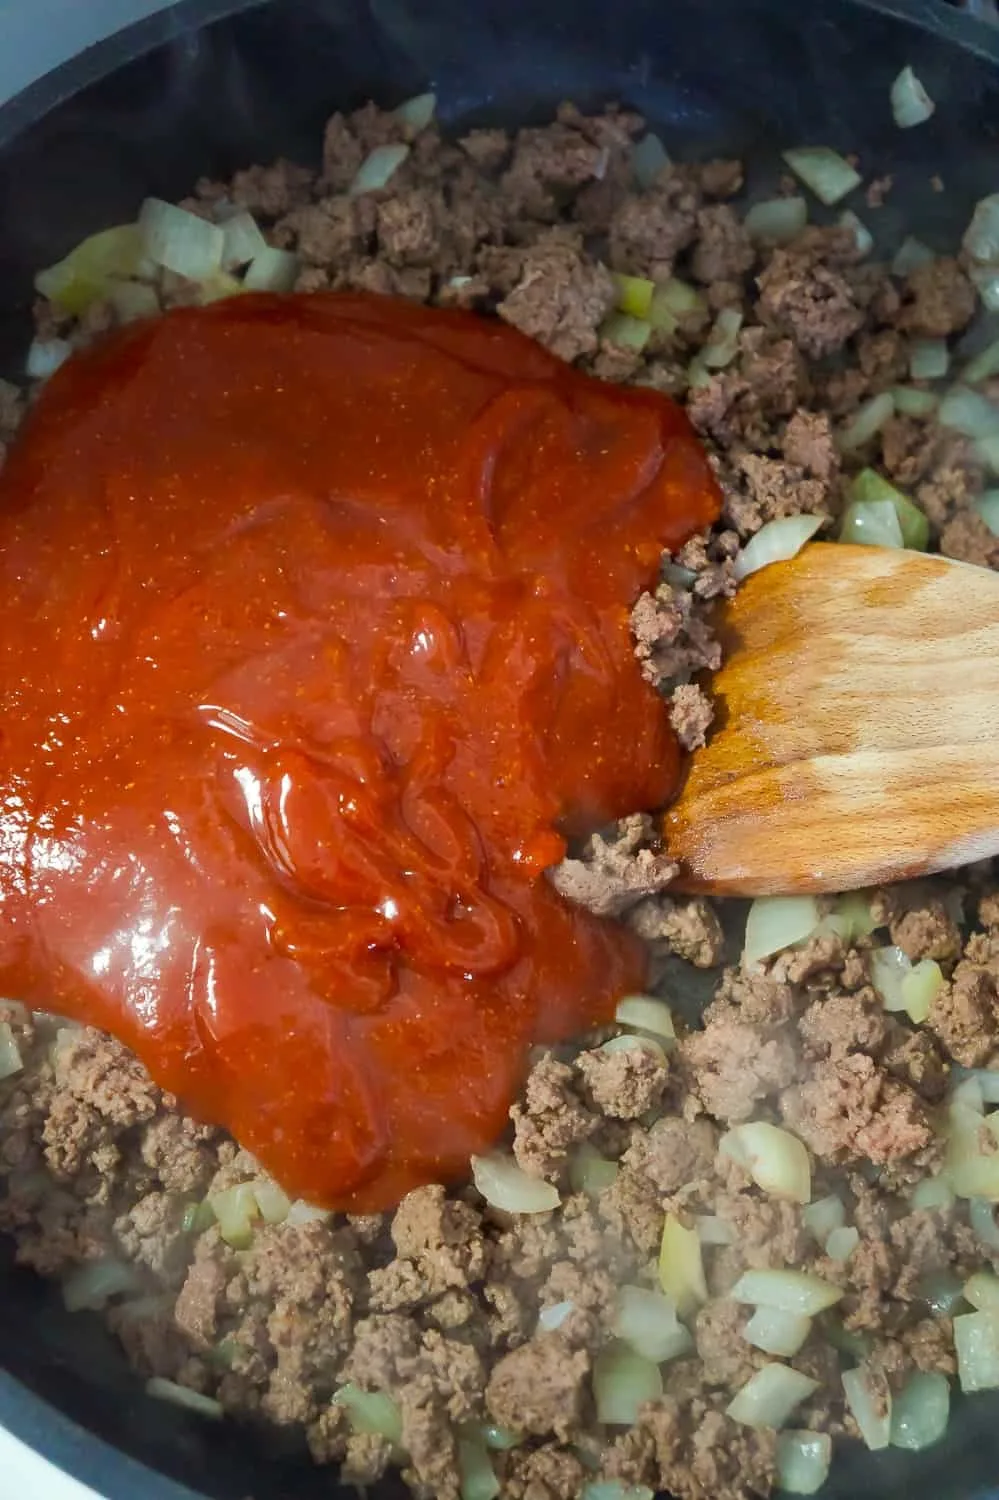 sloppy joe sauce added to cooked ground beef in a frying pan